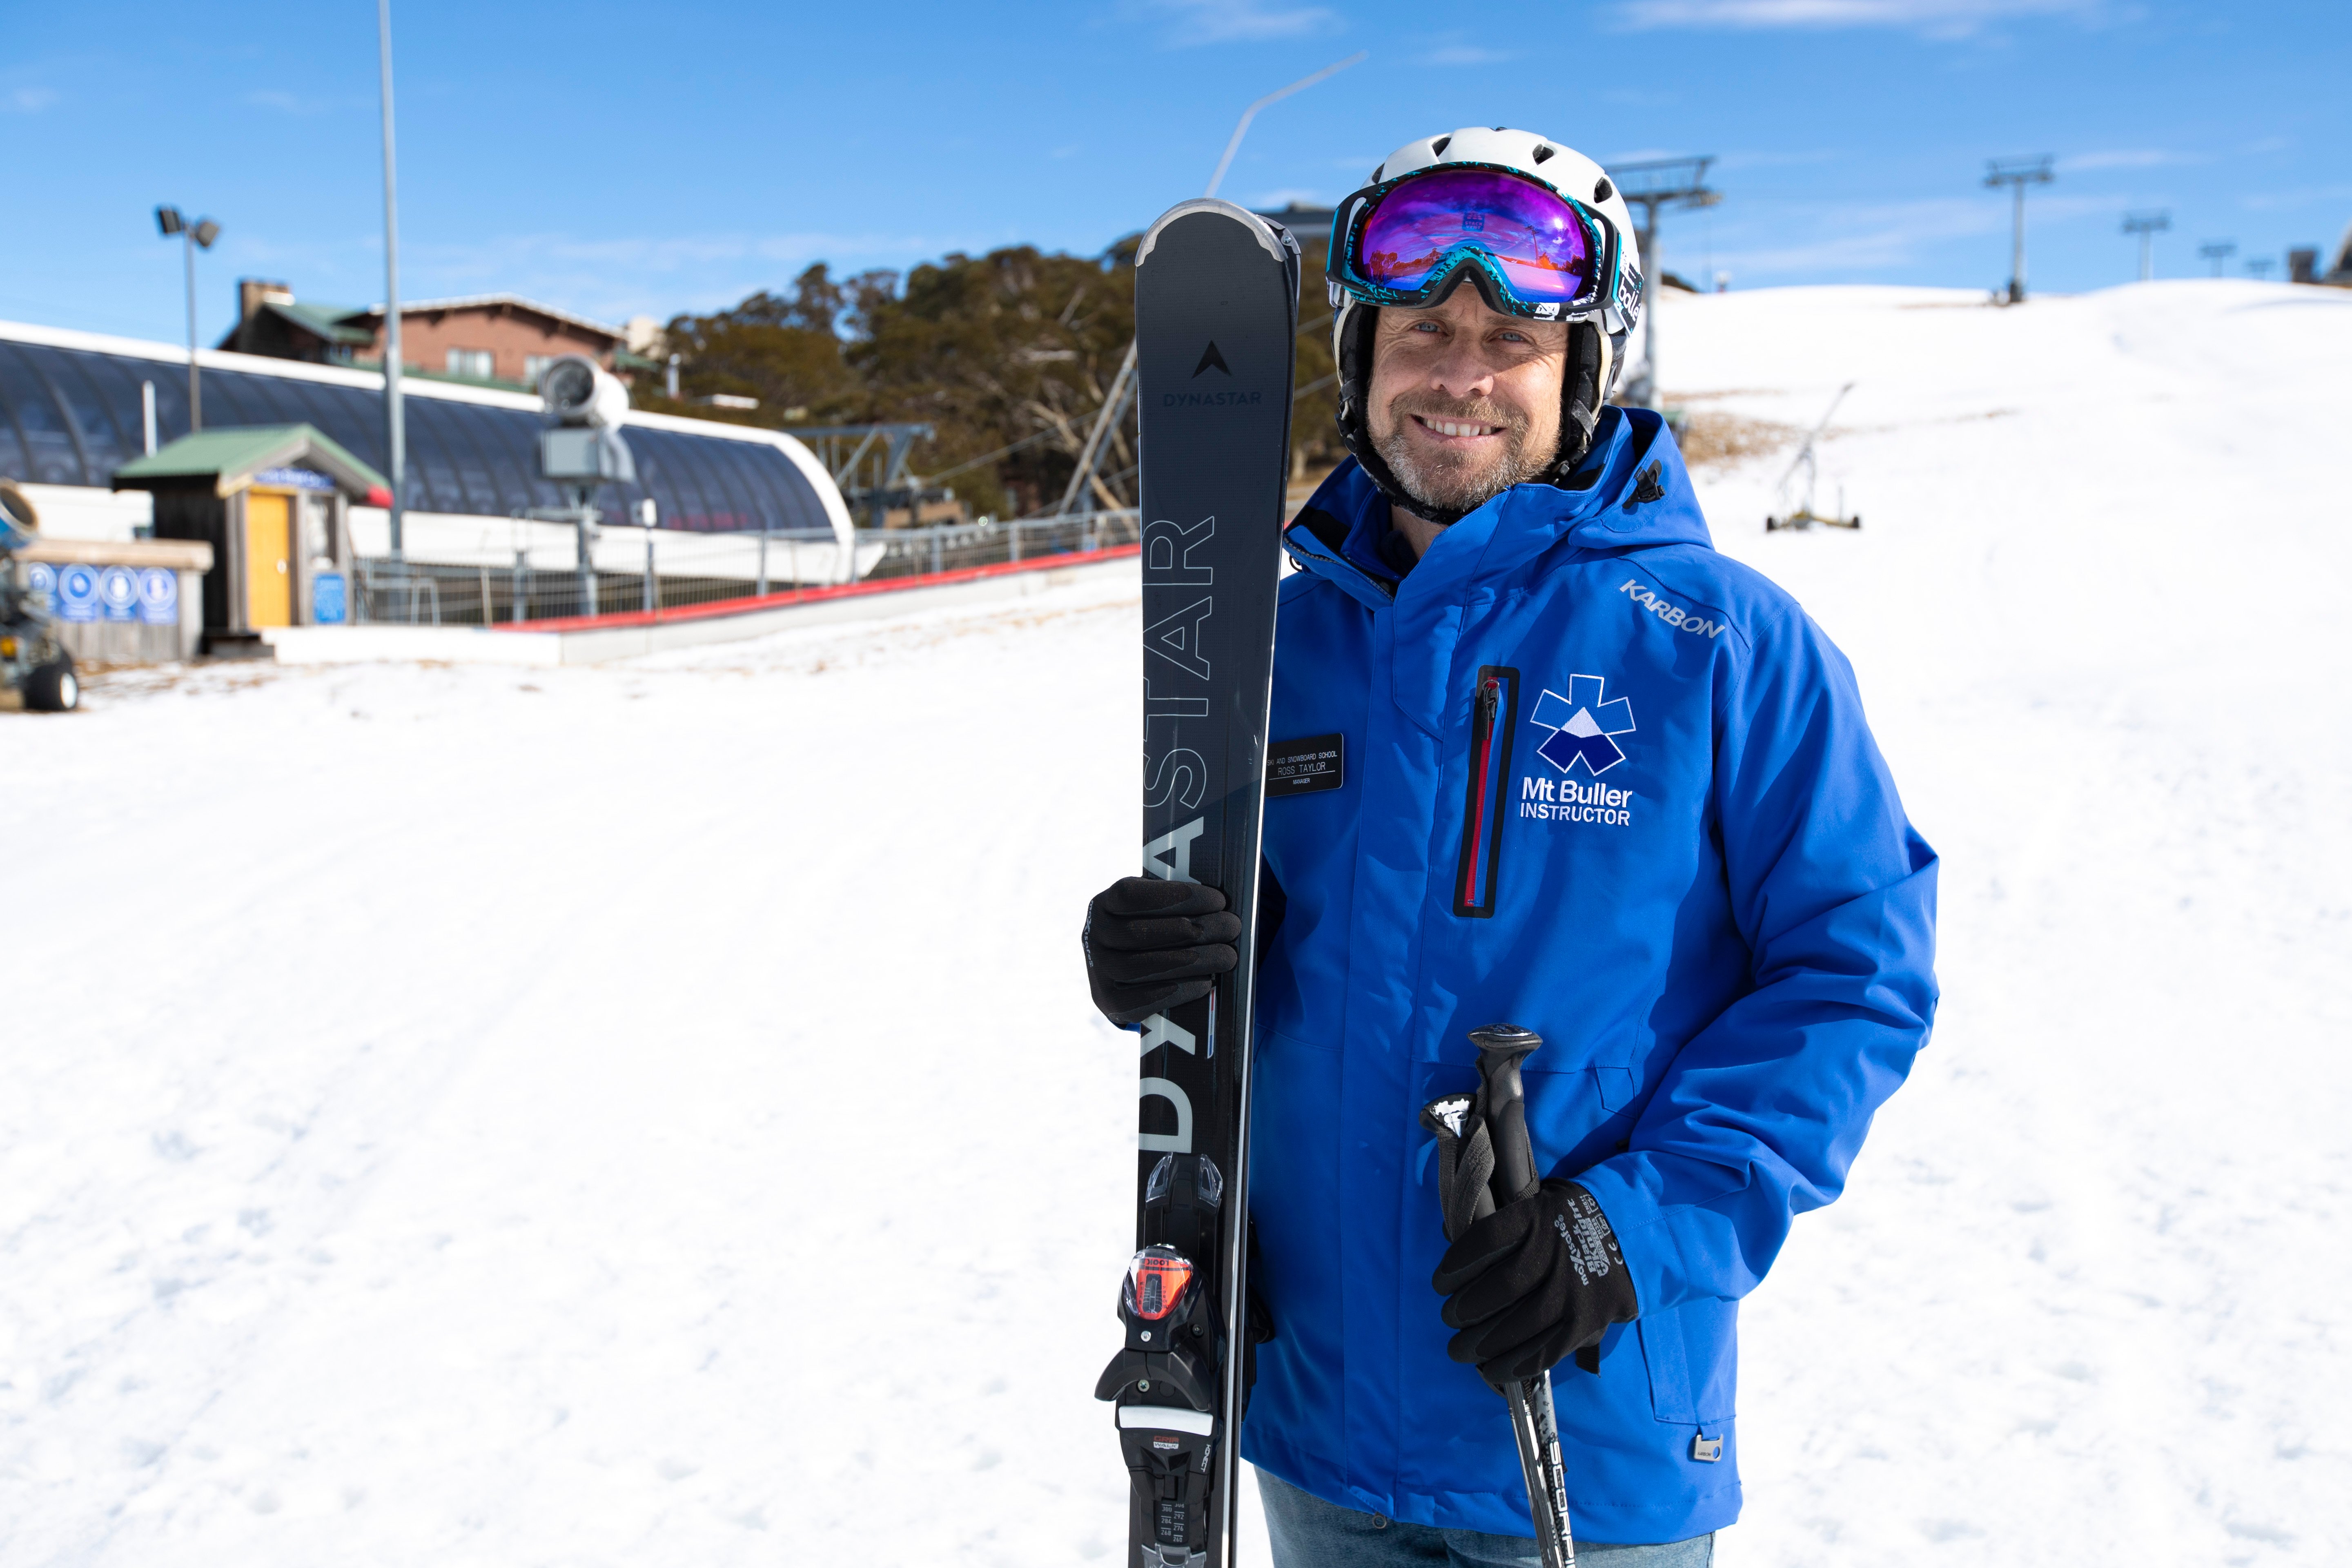 Ski and snowboard school instructors are experts in improving your skiing and boarding